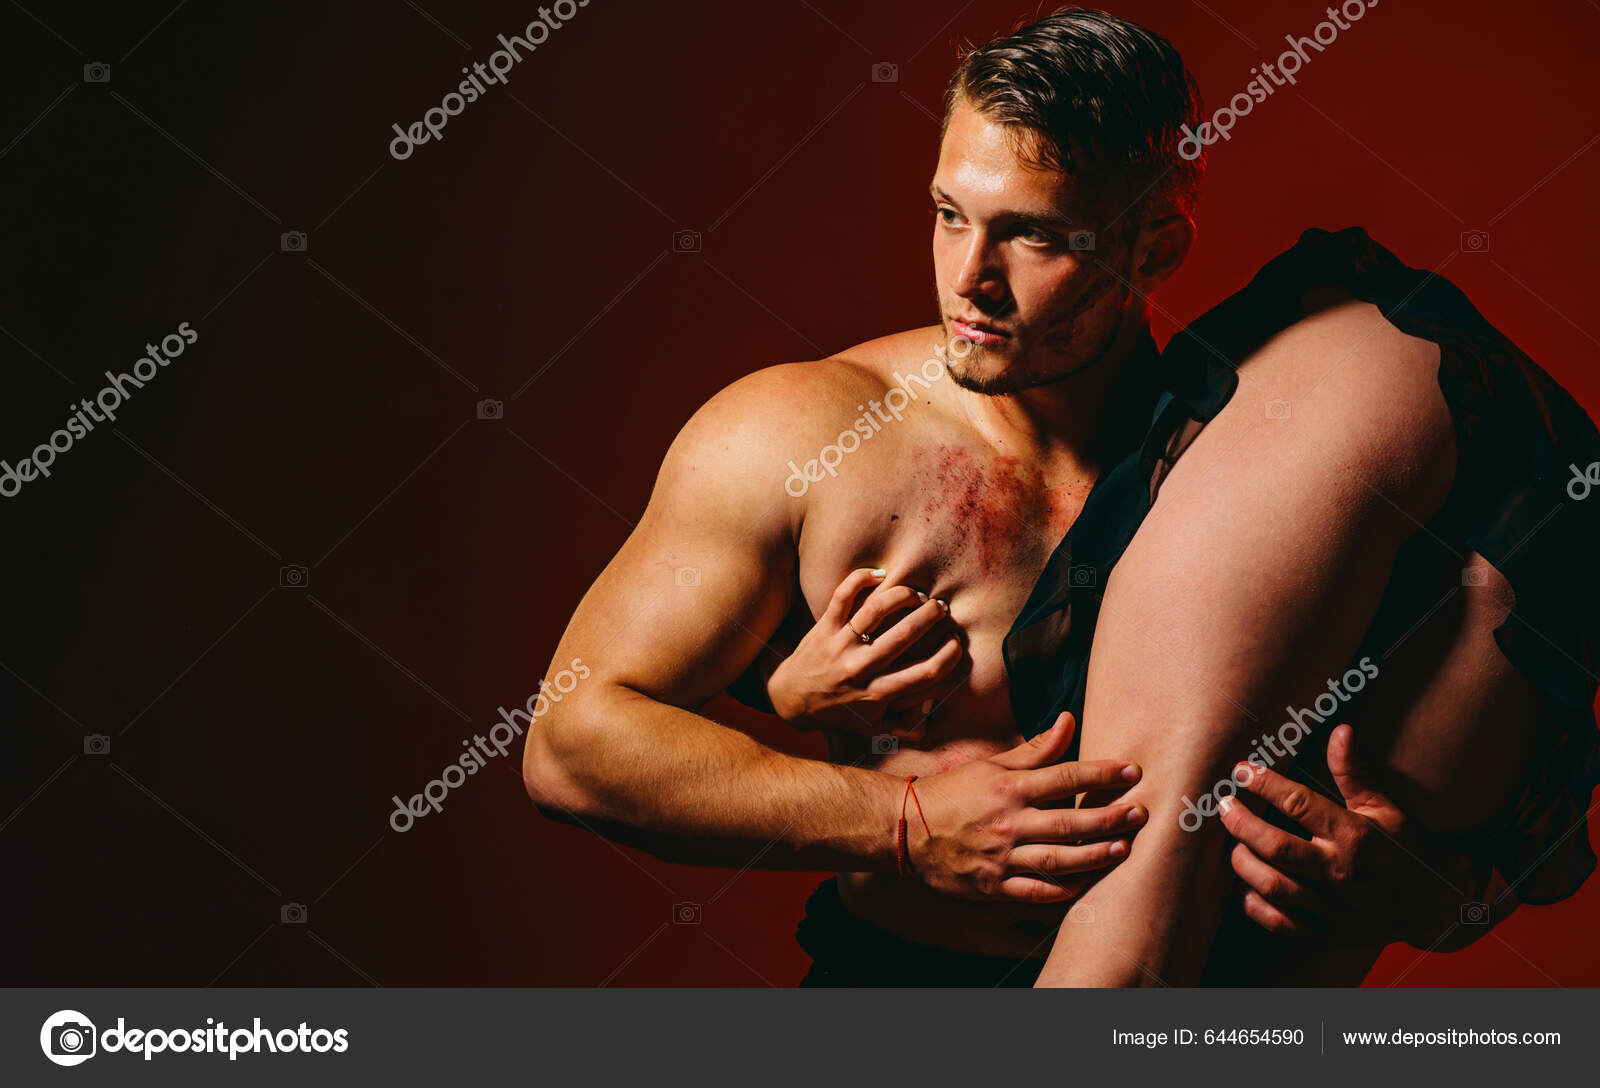 Sexy Couple Play Love Games Brave Firefighter Saved Woman Dominating Stock Photo by ©Tverdohlib 644654590 photo